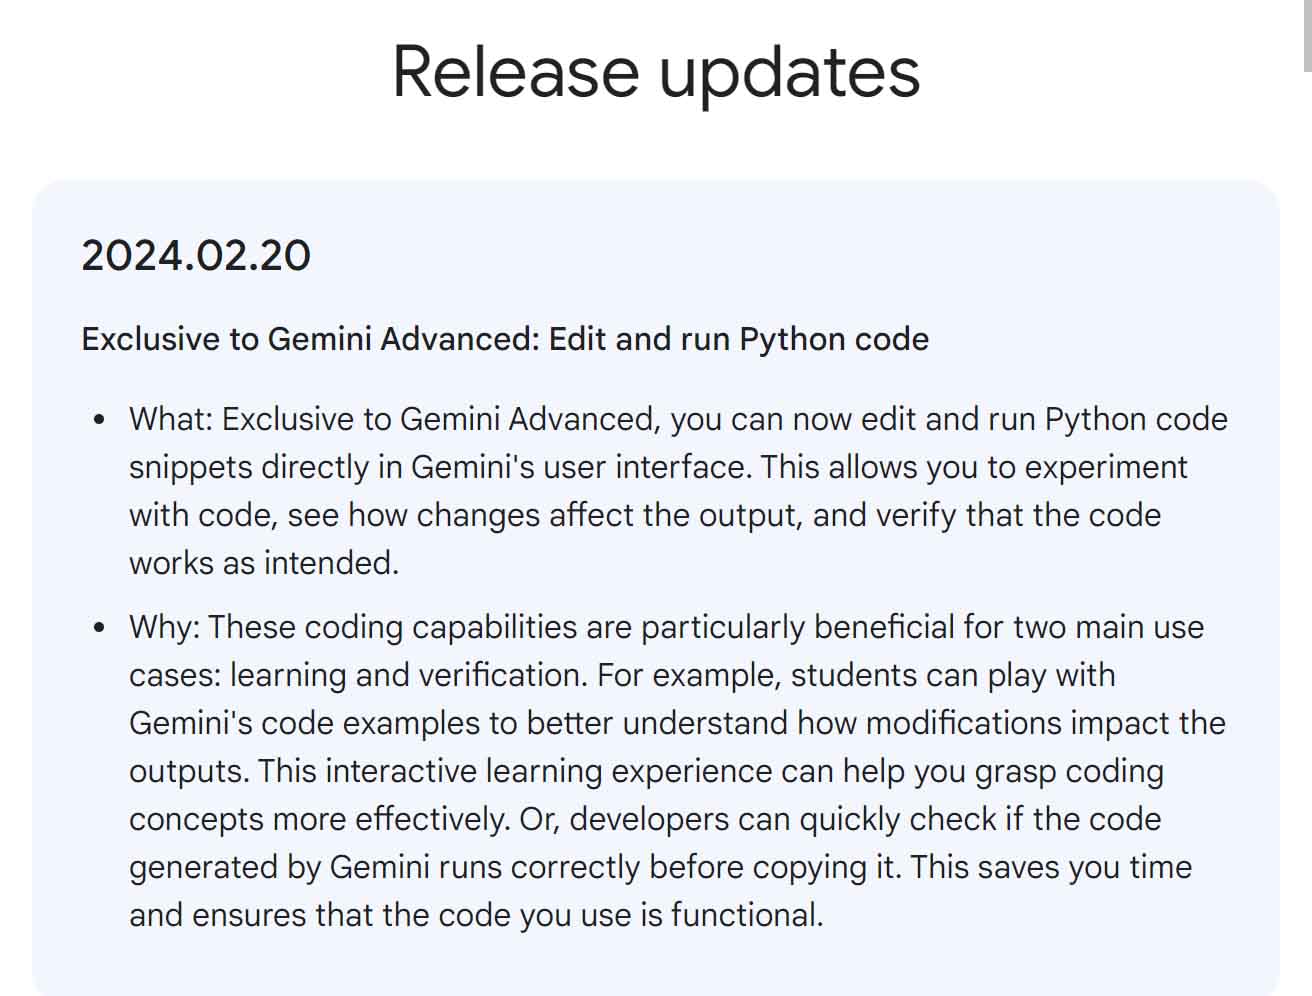 Gemini AI Update to enable Running and Editing Python Code after February 20, 2024 update